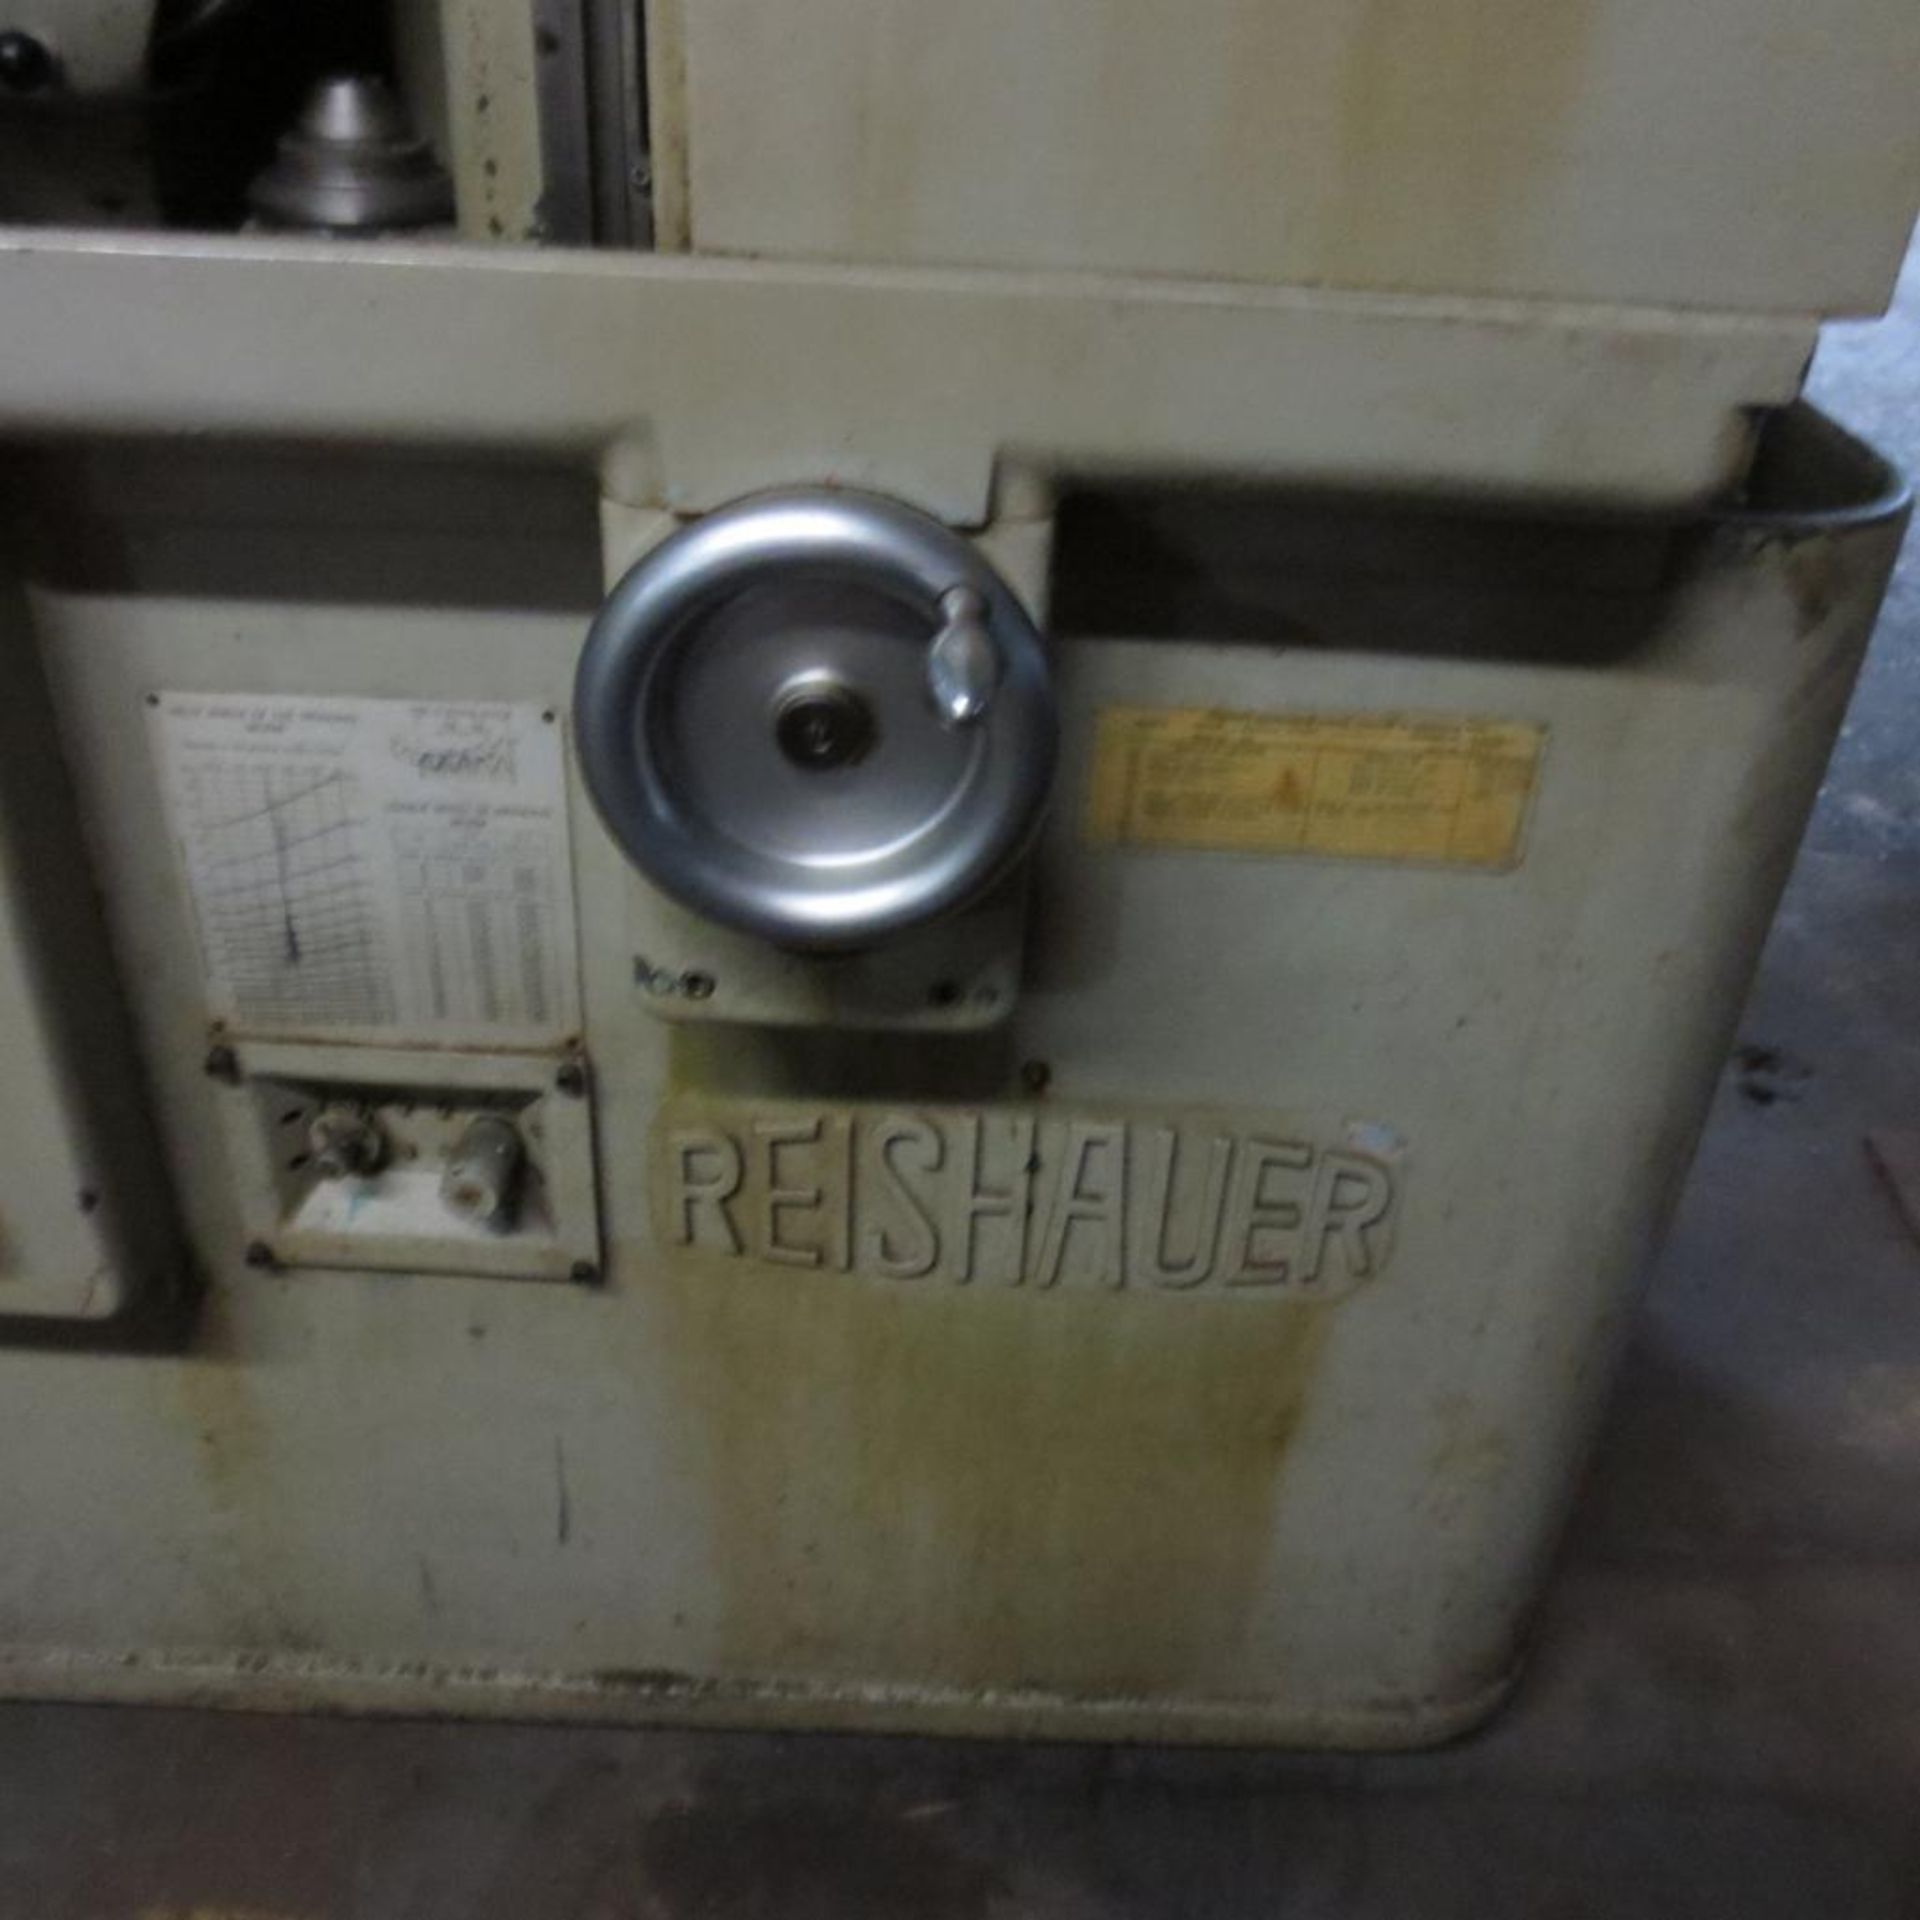 Reishauer Model NZA Grinder. Loading Fee is $350.00 - Image 3 of 6